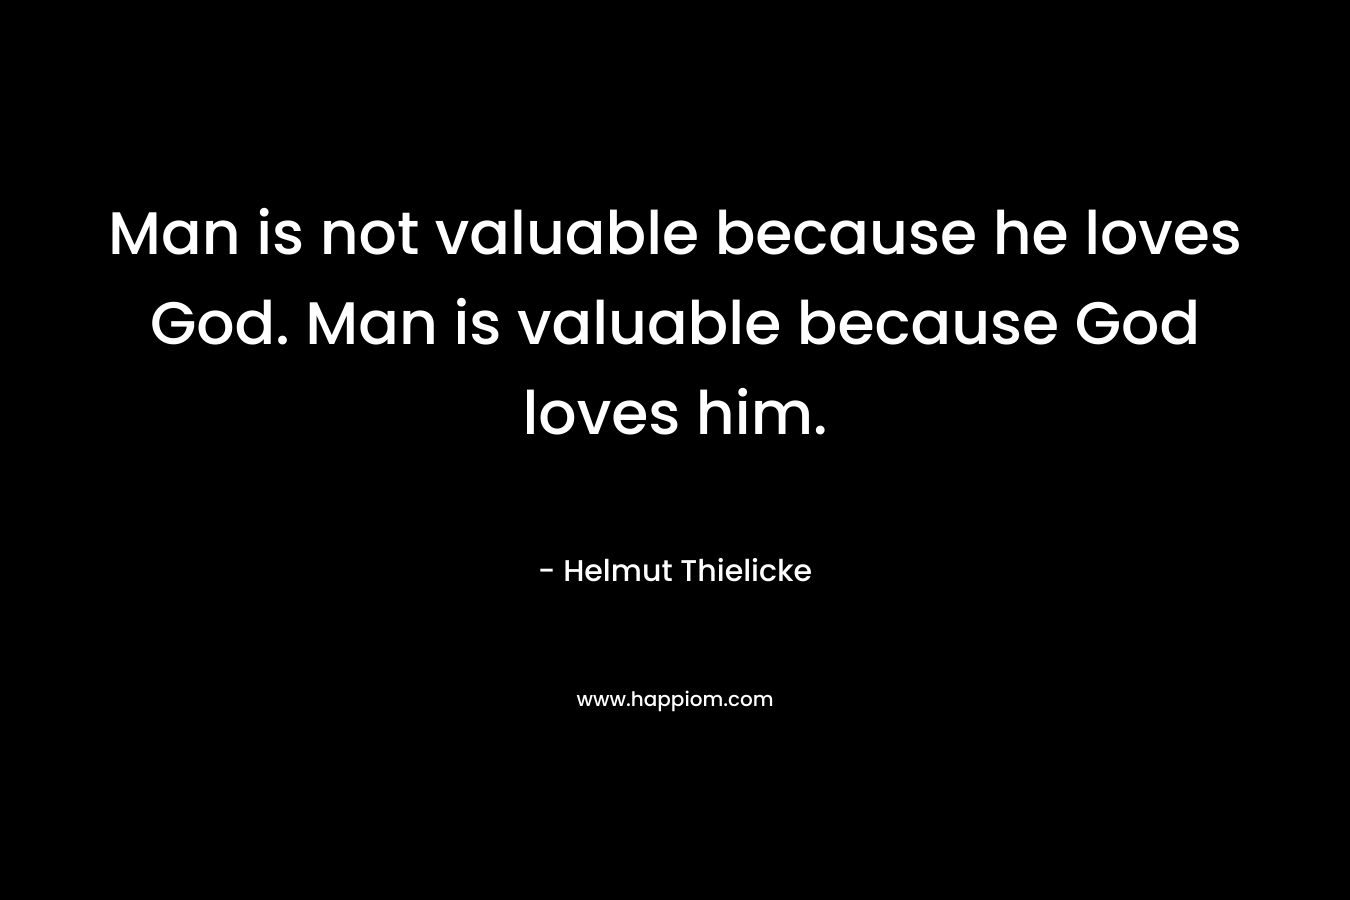 Man is not valuable because he loves God. Man is valuable because God loves him.